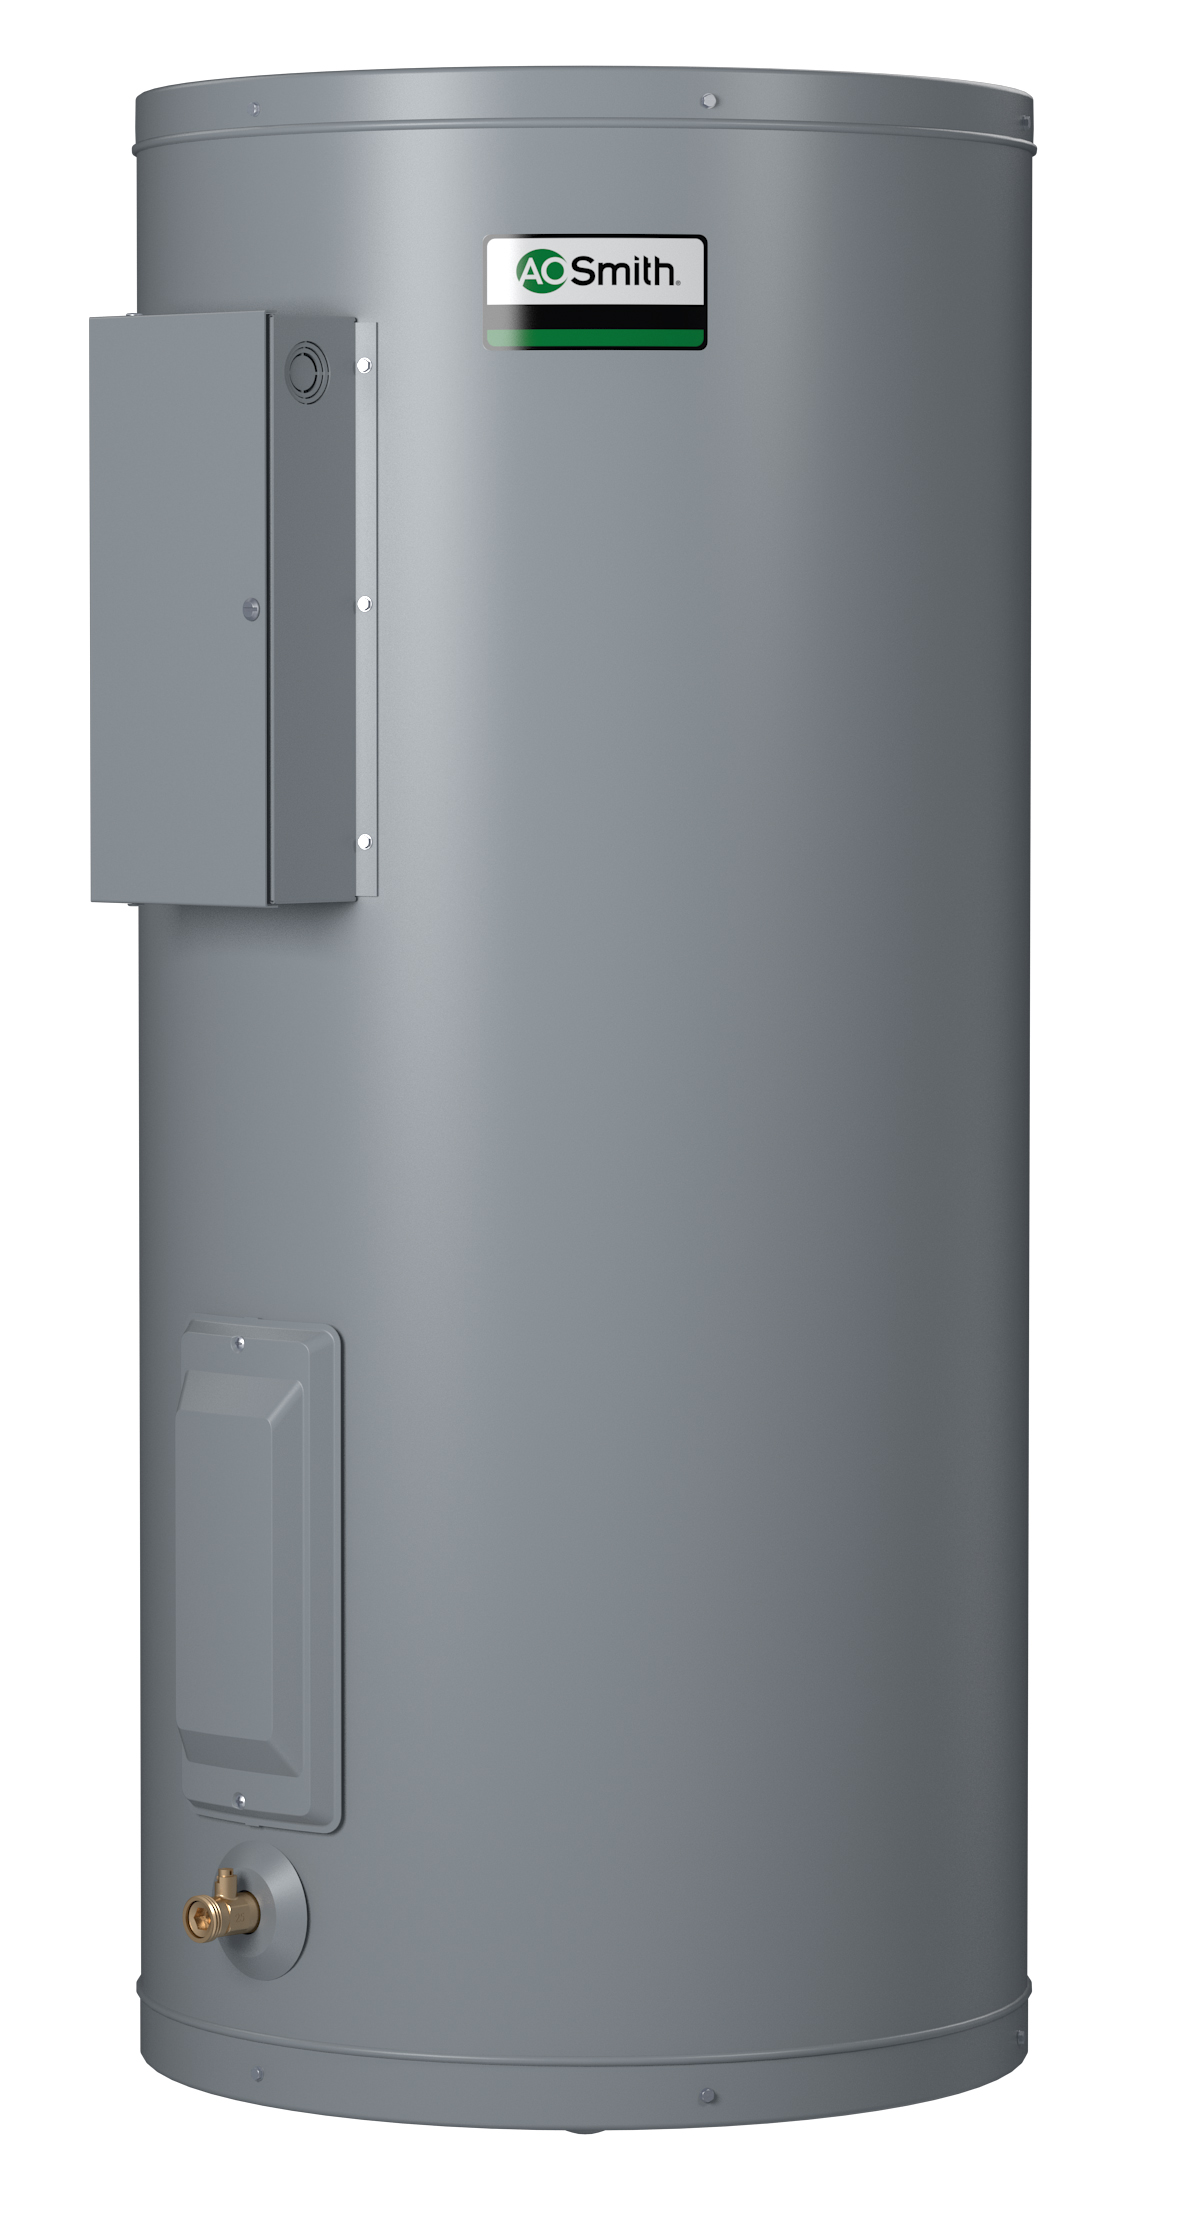 AO SMITH DEL-30D:36 GALLONS, 6.0KW, 480 VOLT, 3 PHASE, (2-6000 WATT ELEMENTS, NON-SIMULTANEOUS WIRING), DURA-POWER, LIGHT DUTY COMMERCIAL ELECTRIC WATER HEATER